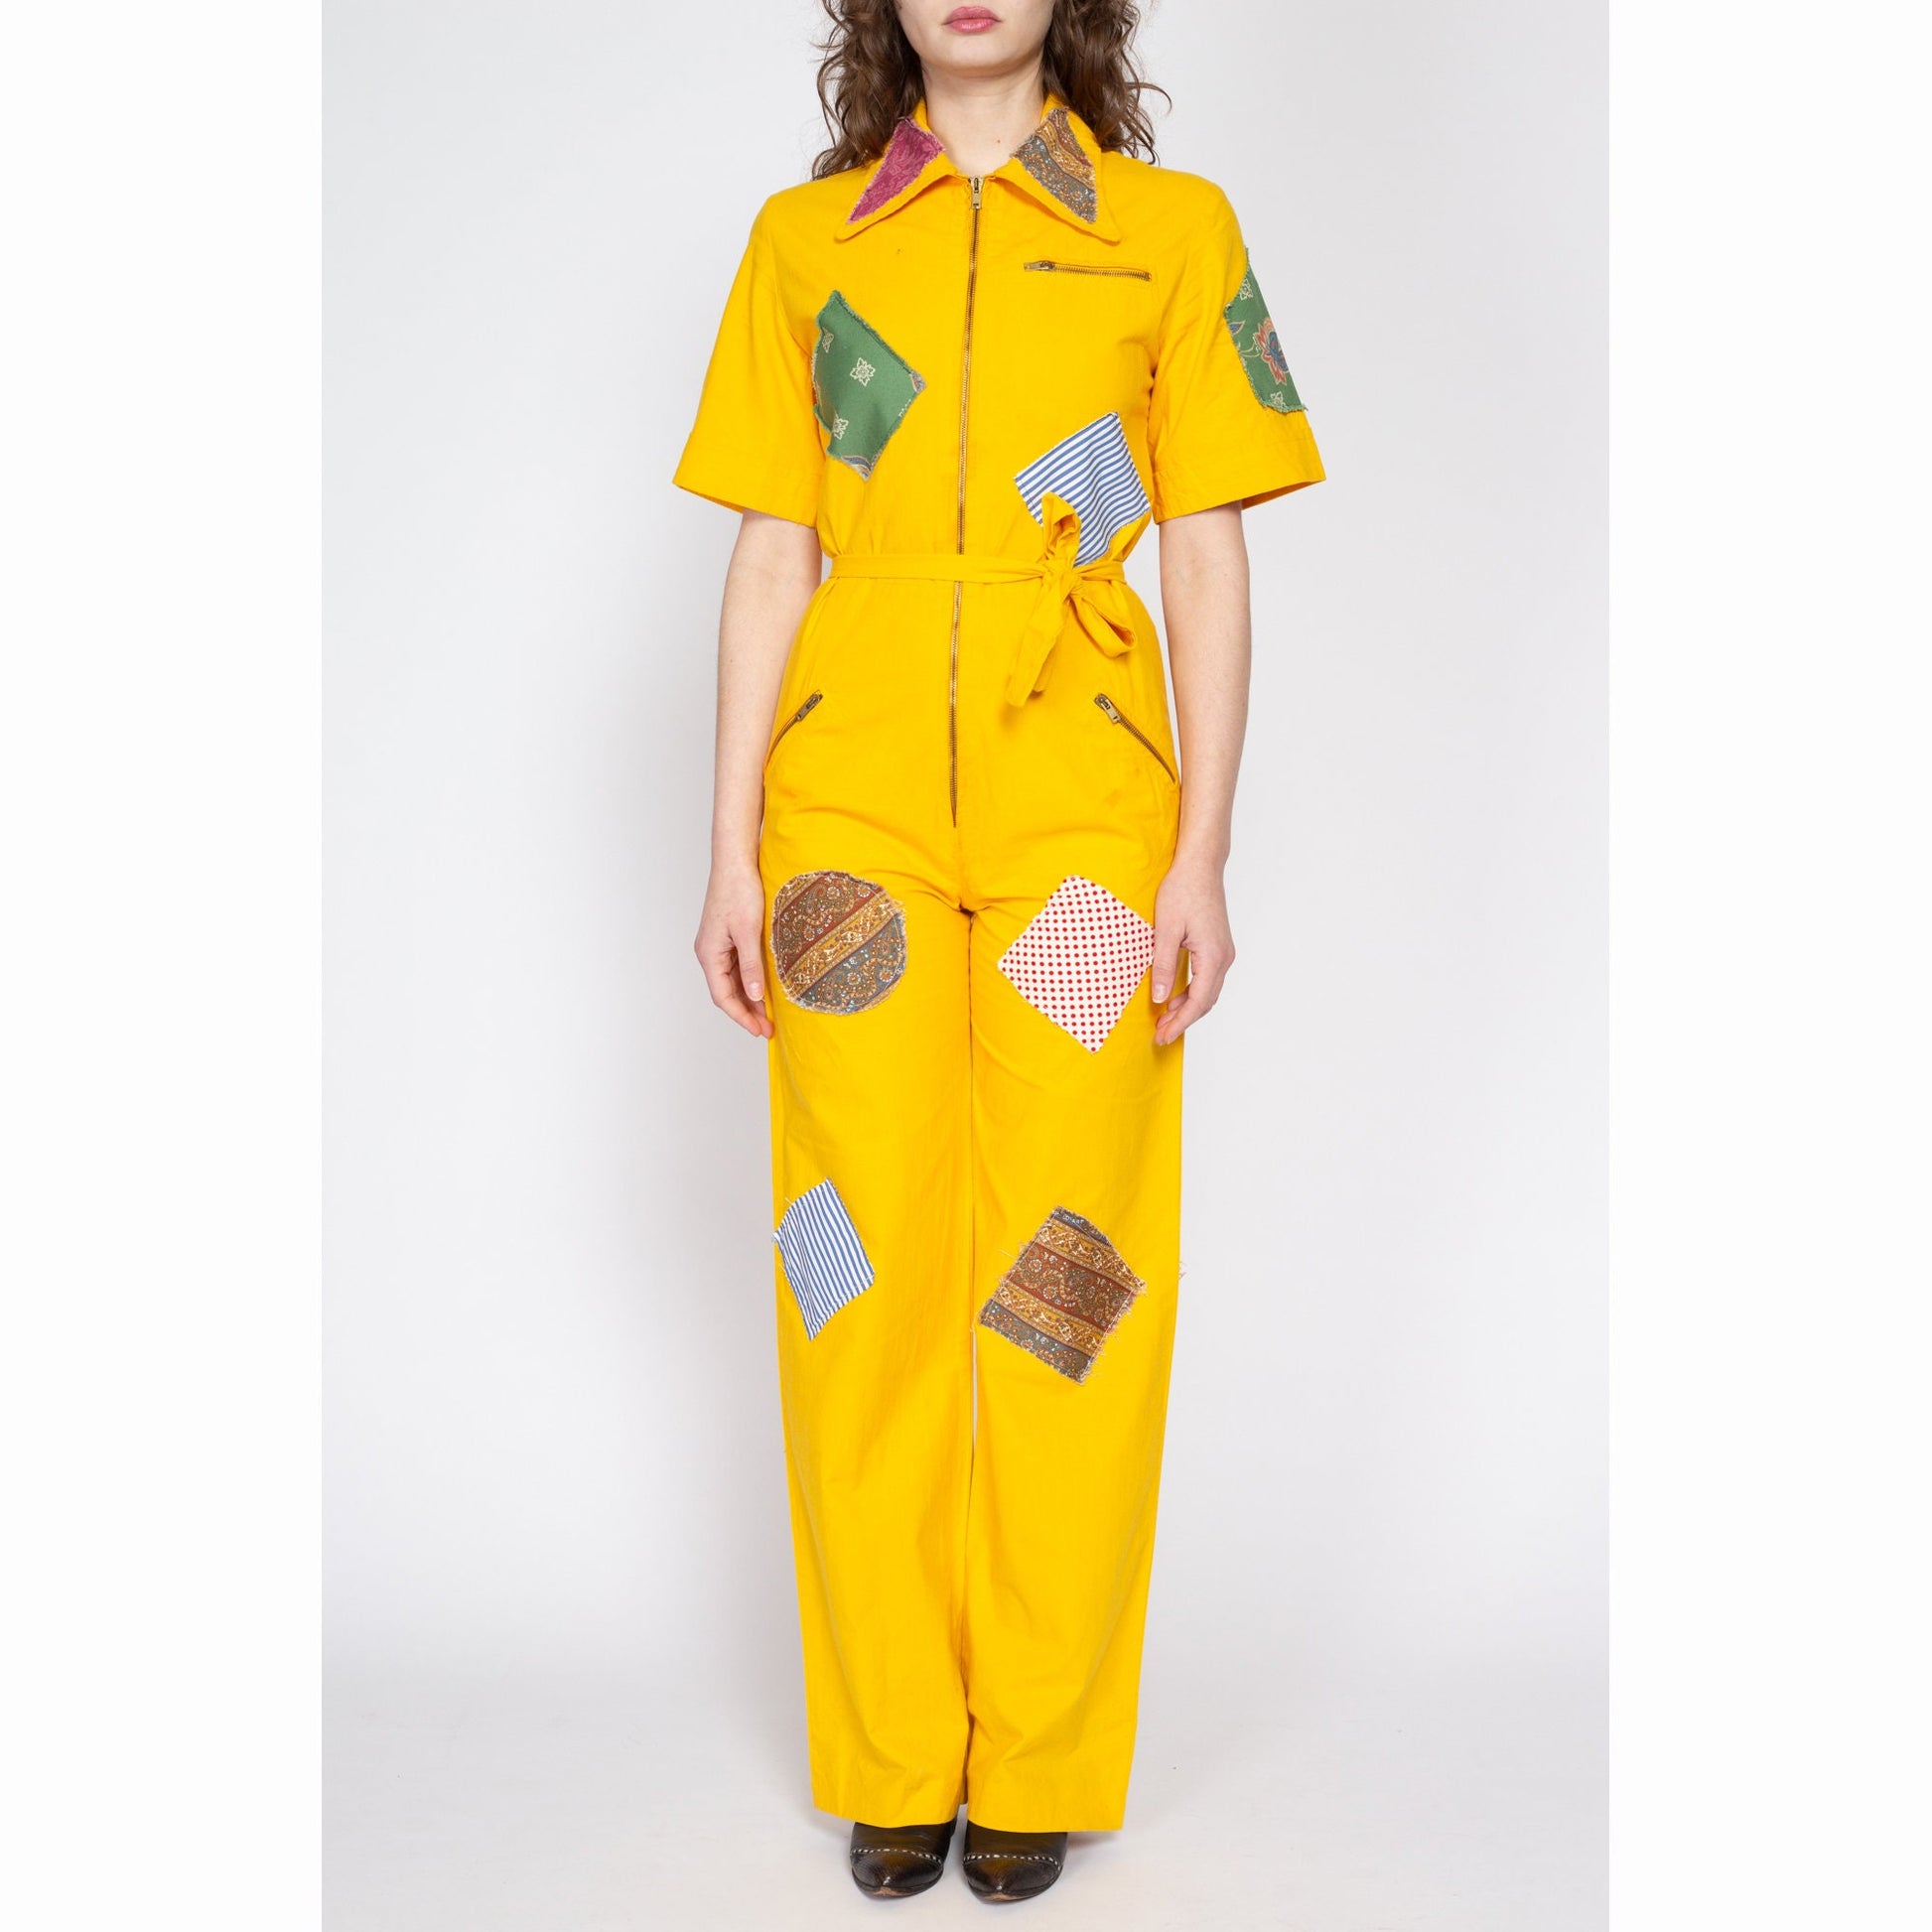 Medium 70s Yellow Patchwork Coverall Jumpsuit – Flying Apple Vintage